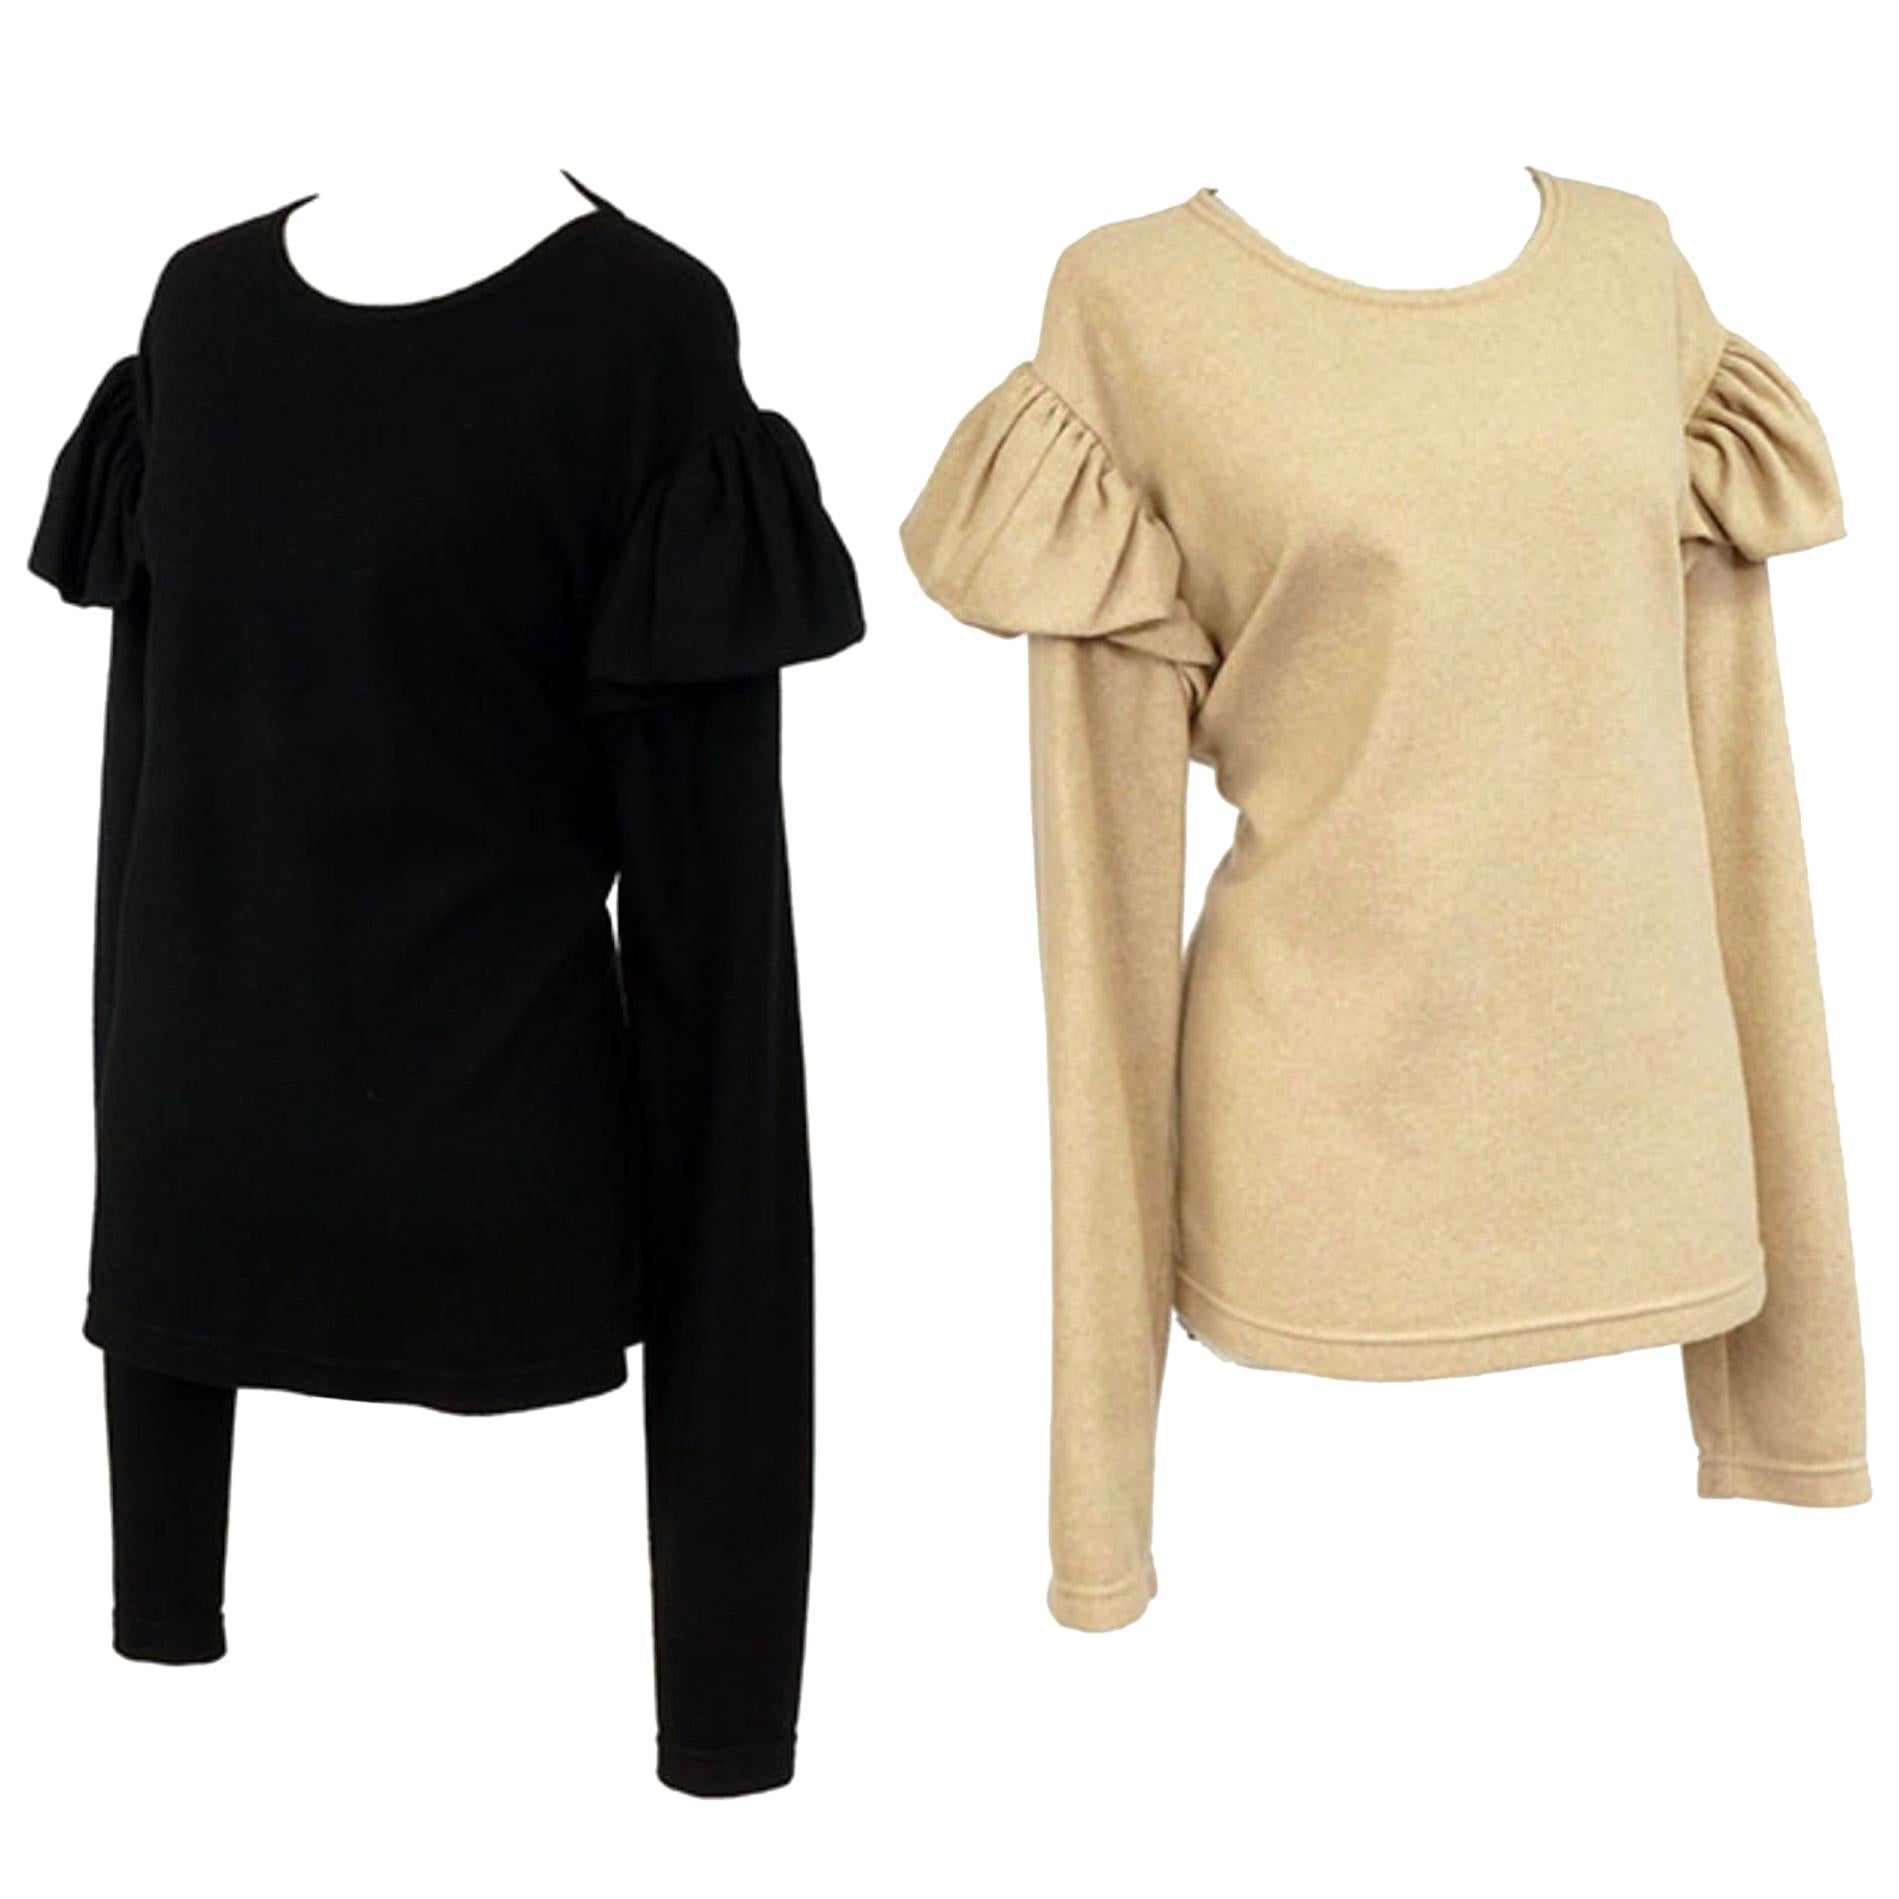 Two Sam Kori George Cashmere Sweaters.  Black And Cream With Sholder Detail.